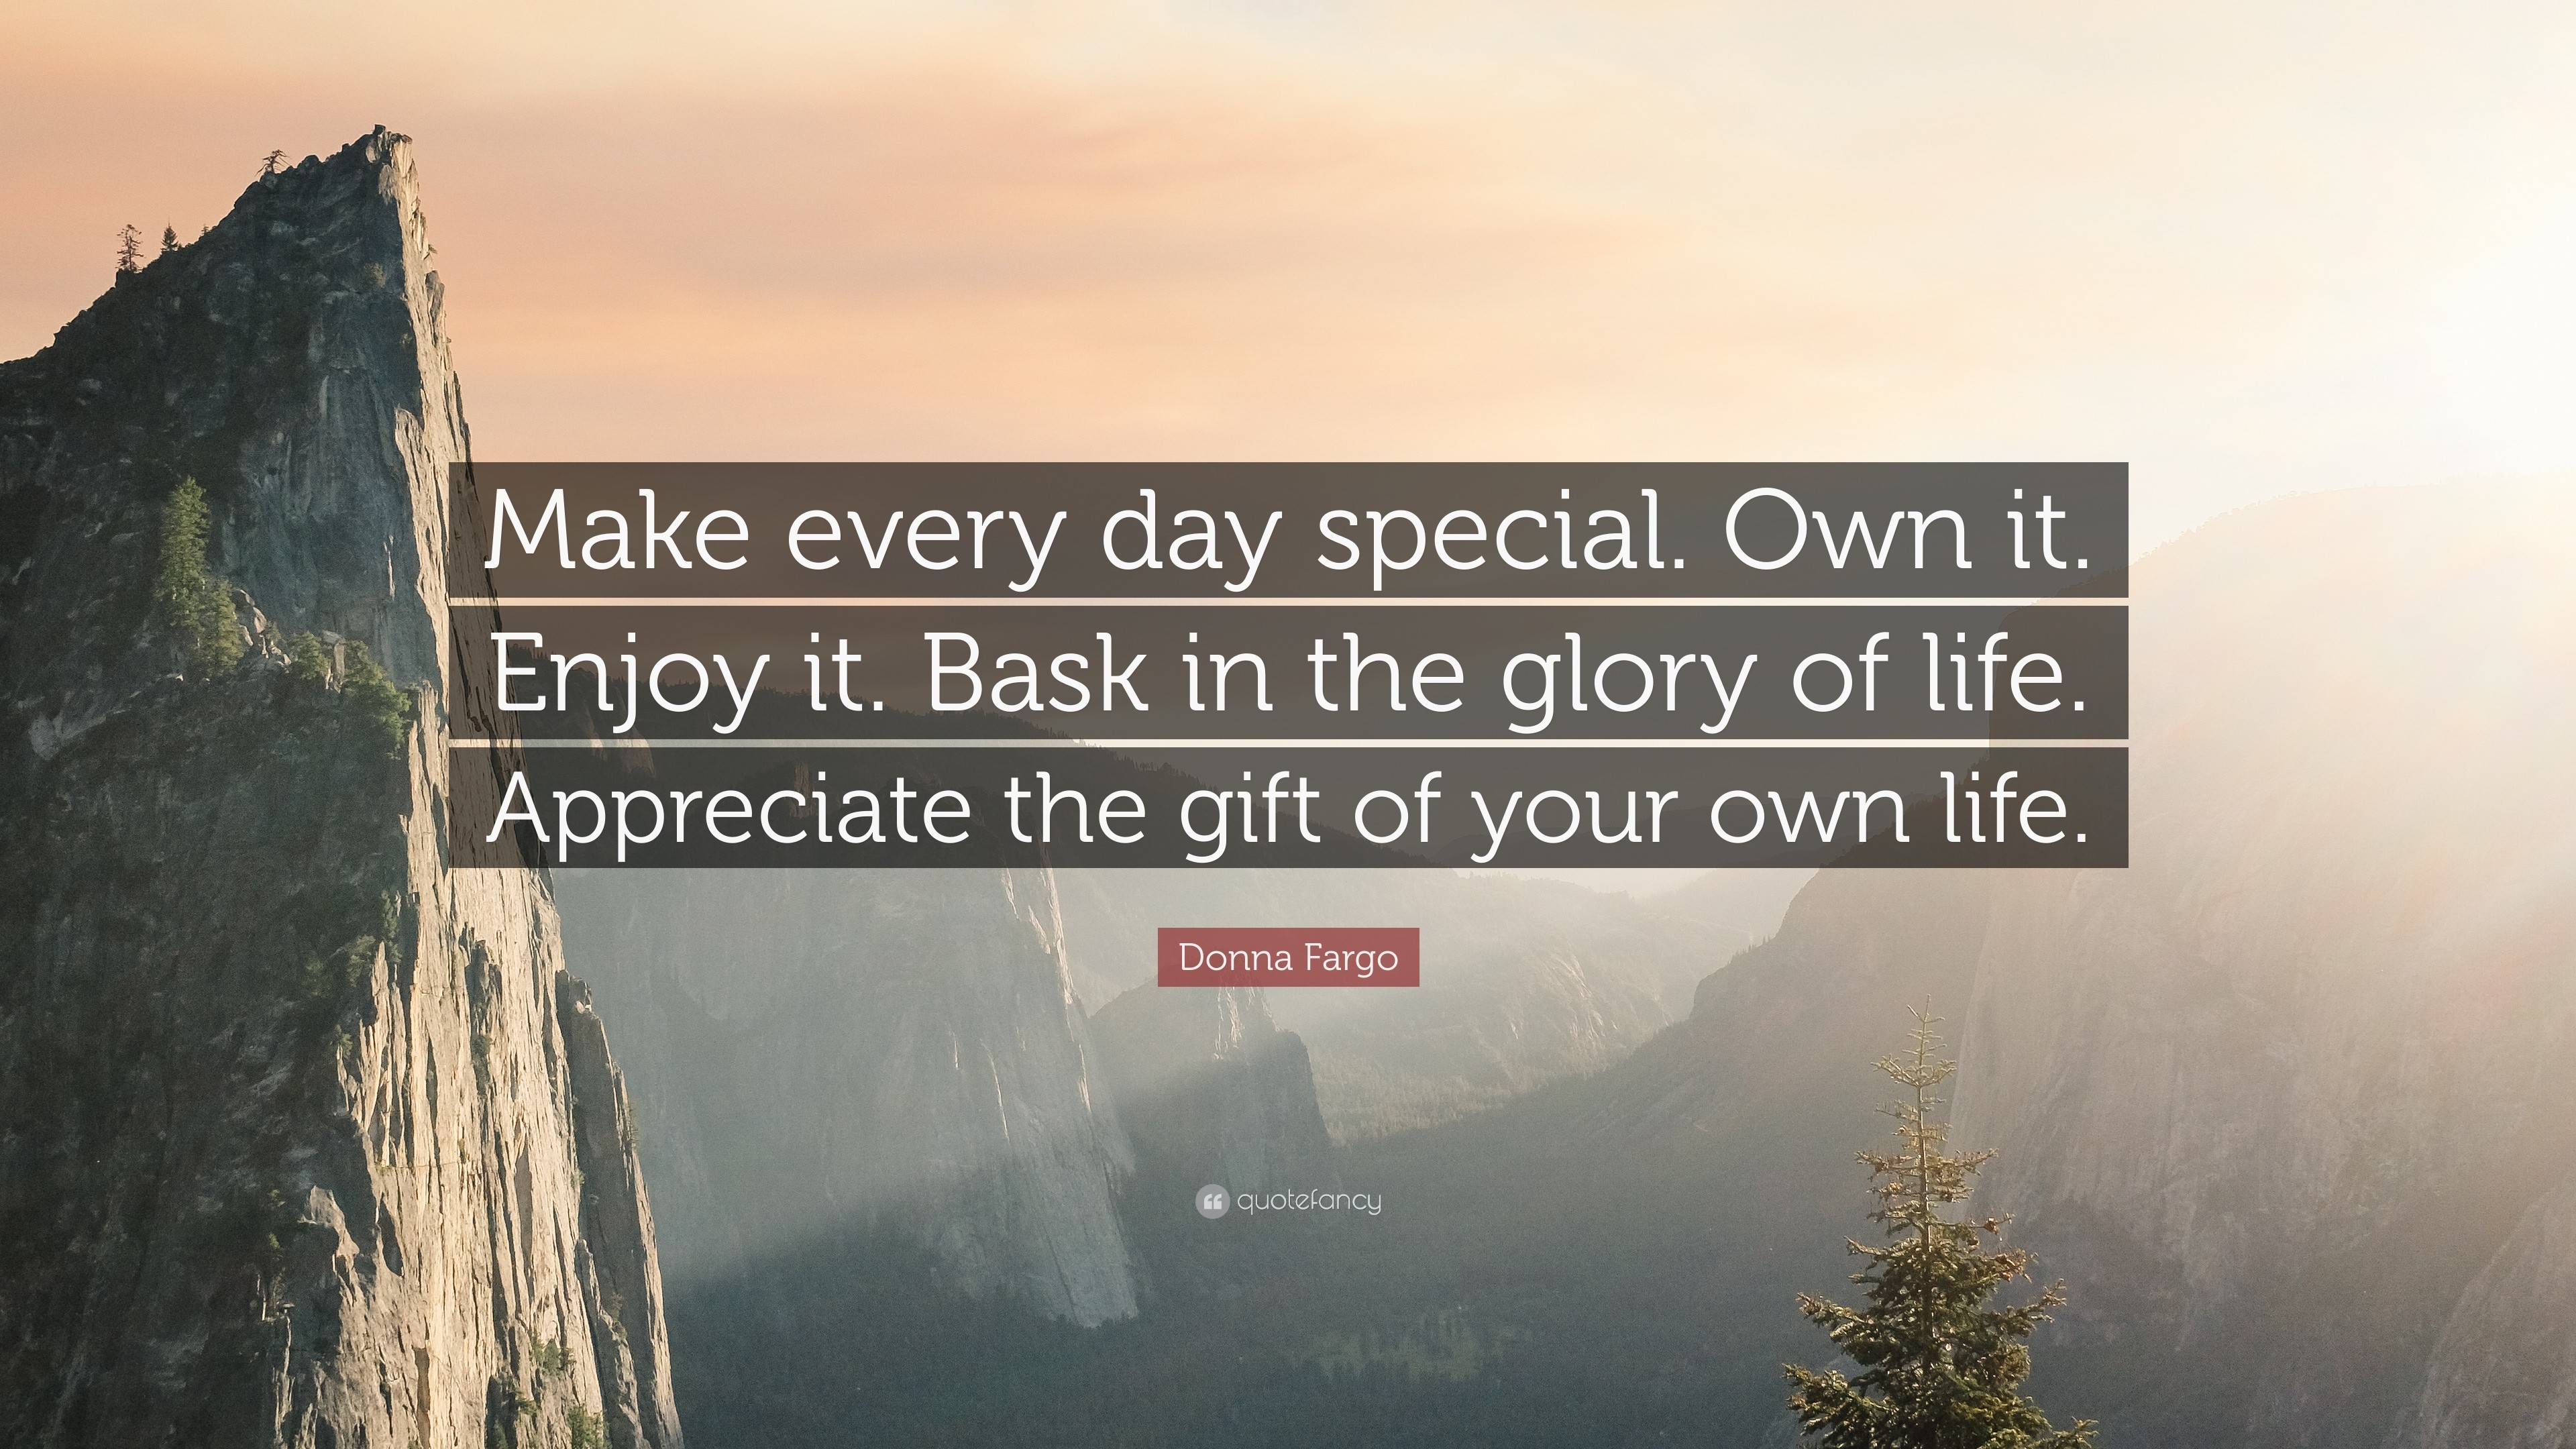 3840x2160 Donna Fargo Quote: “Make every day special. Own it. Enjoy it.